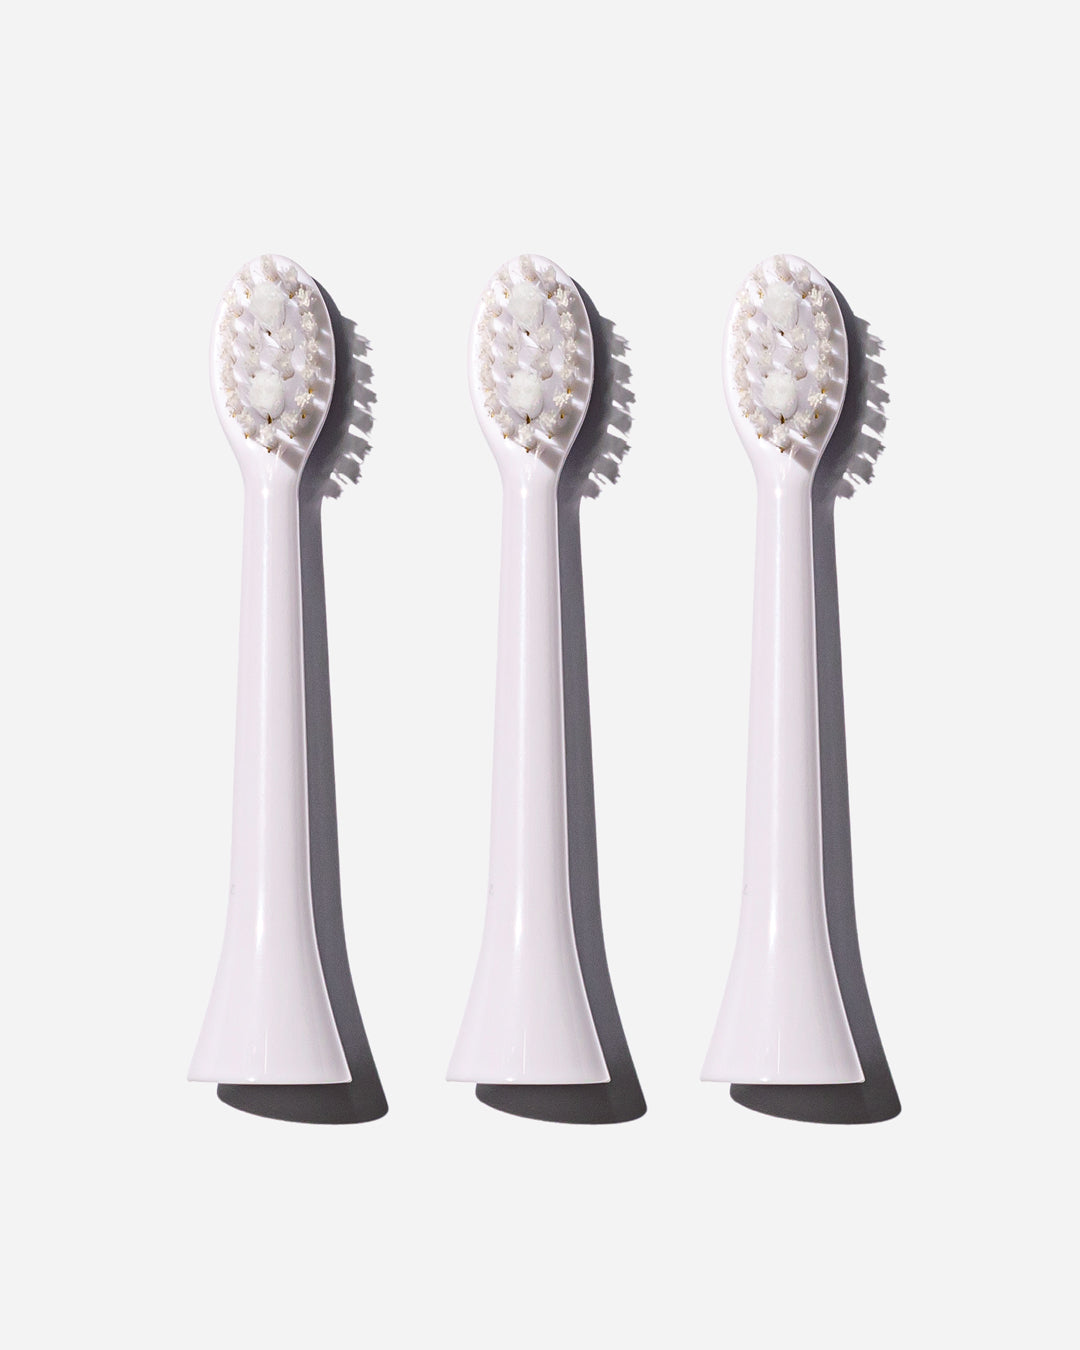 Sonic Toothbrush Replacement Heads - White